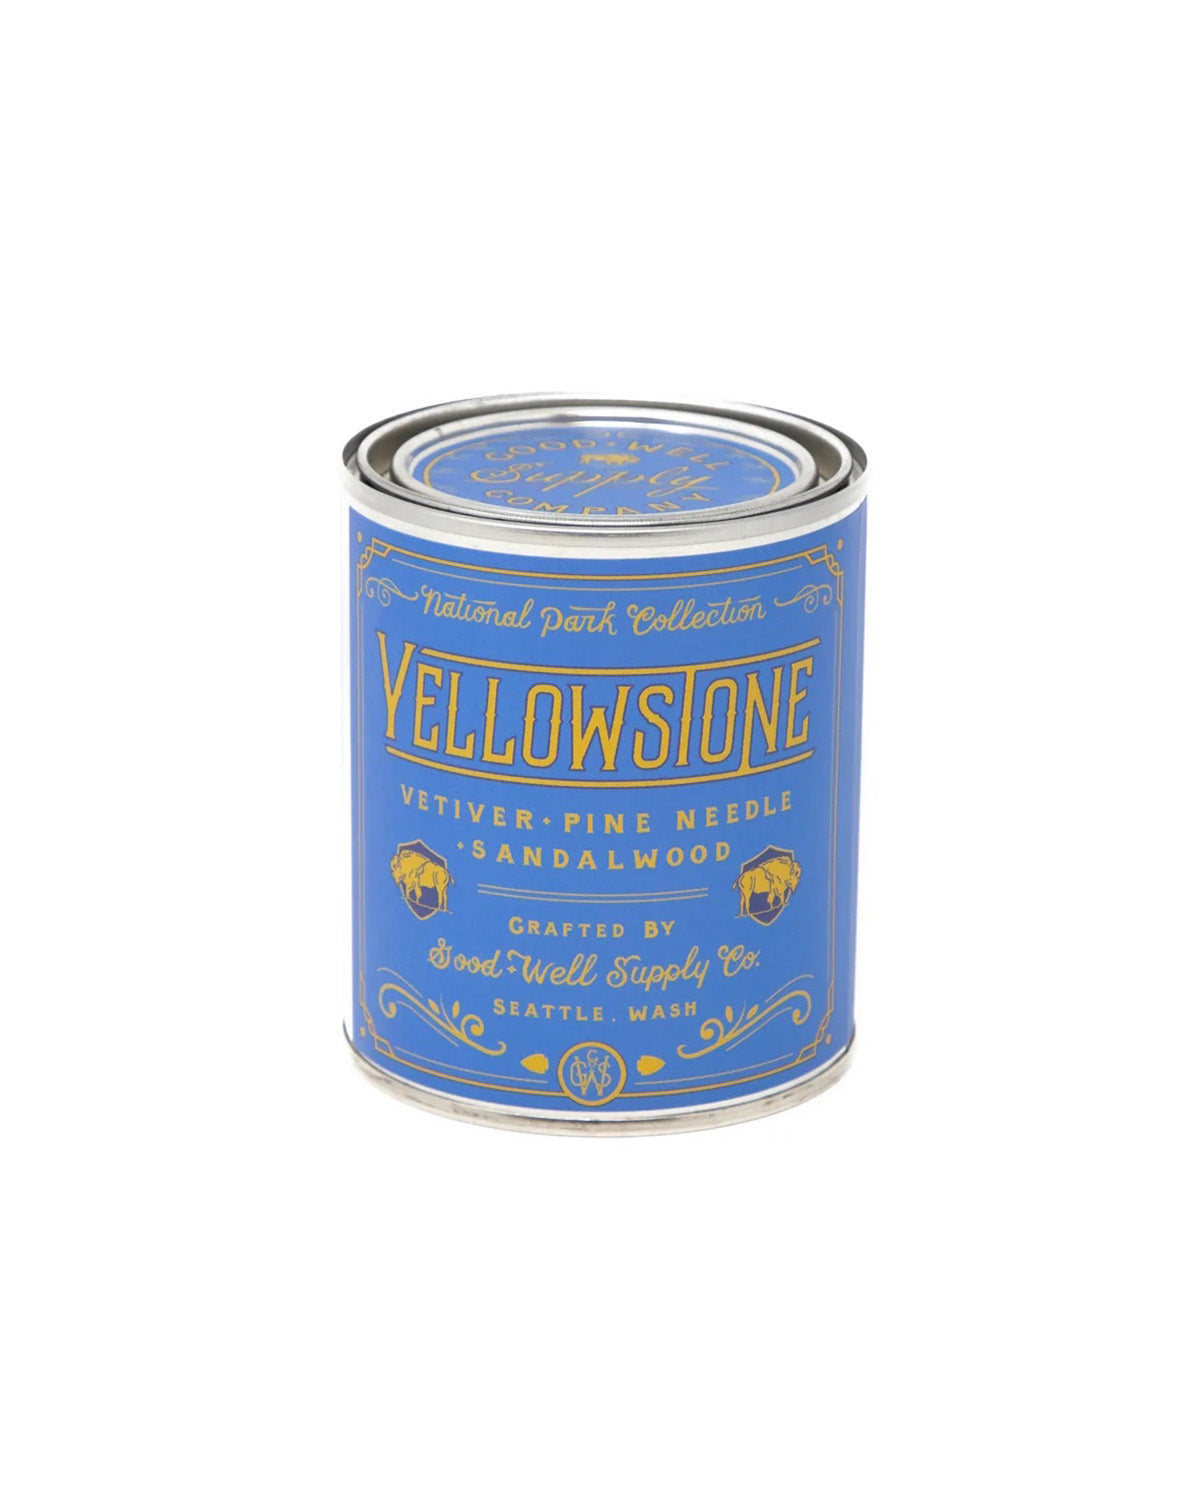 Good & Well Supply Co Yellowstone National Park Candle 8 oz Home accessories